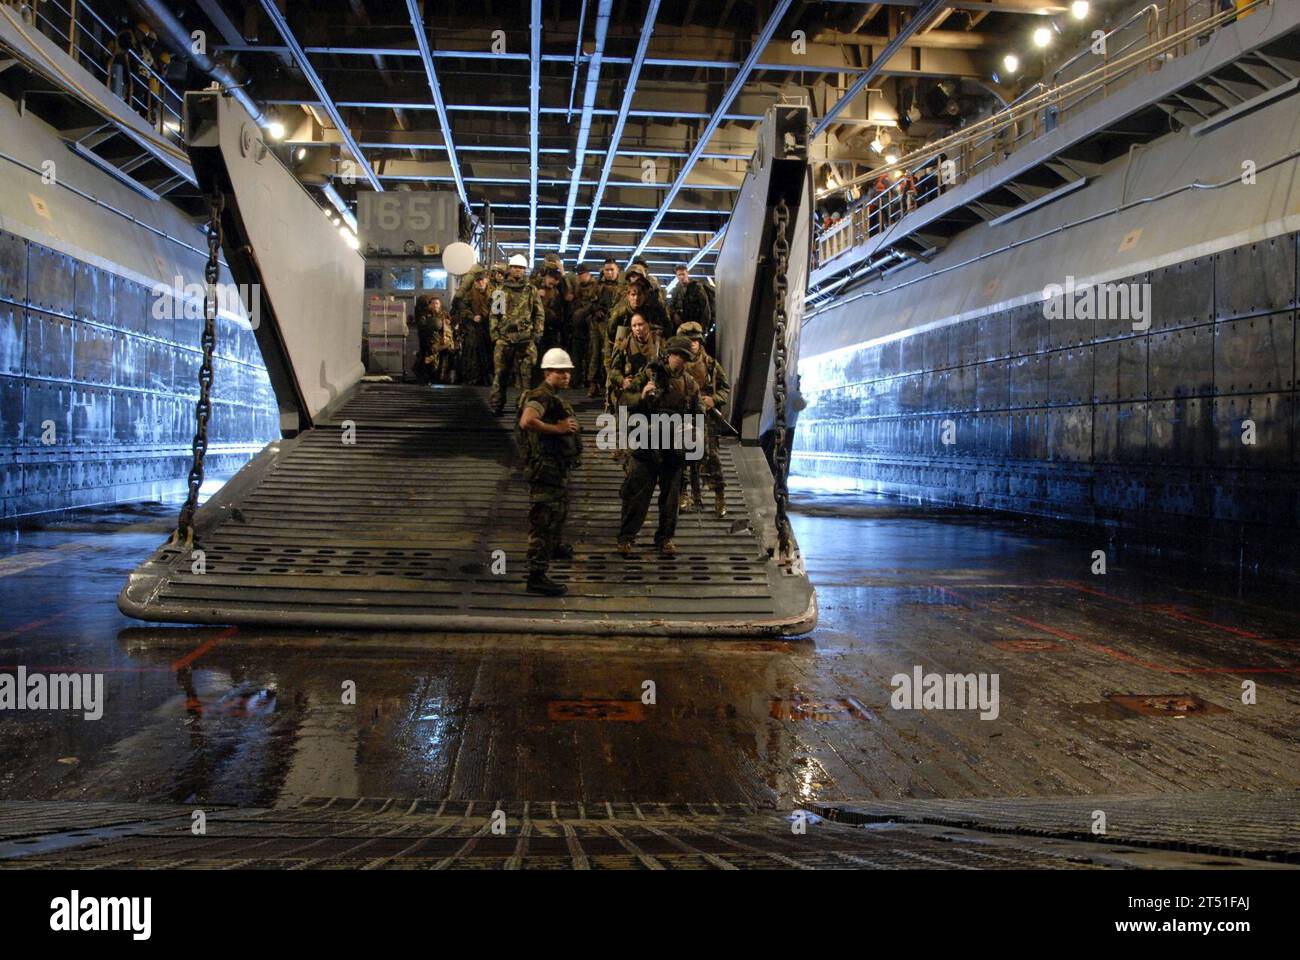 0706264614W-084 CORAL SEA (June 26, 2007) - Members of the 3d Marine Expeditionary BrigadeХs 31st Marine Expeditionary Unit prepare to enter a landing craft utility of Assault Craft Unit (ACU) 1 at the concluding stages of Talisman Saber 2007 (TS07). TS07 is a biennial U.S. and Australian-led Joint Task Force exercise designed to prepare both nations for crisis action planning and execution of contingency operations. TS07 maintains a high level of interoperability between both forces, demonstrating commitment to regional security and the U.S. and Australian military alliance. U.S. Navy Stock Photo